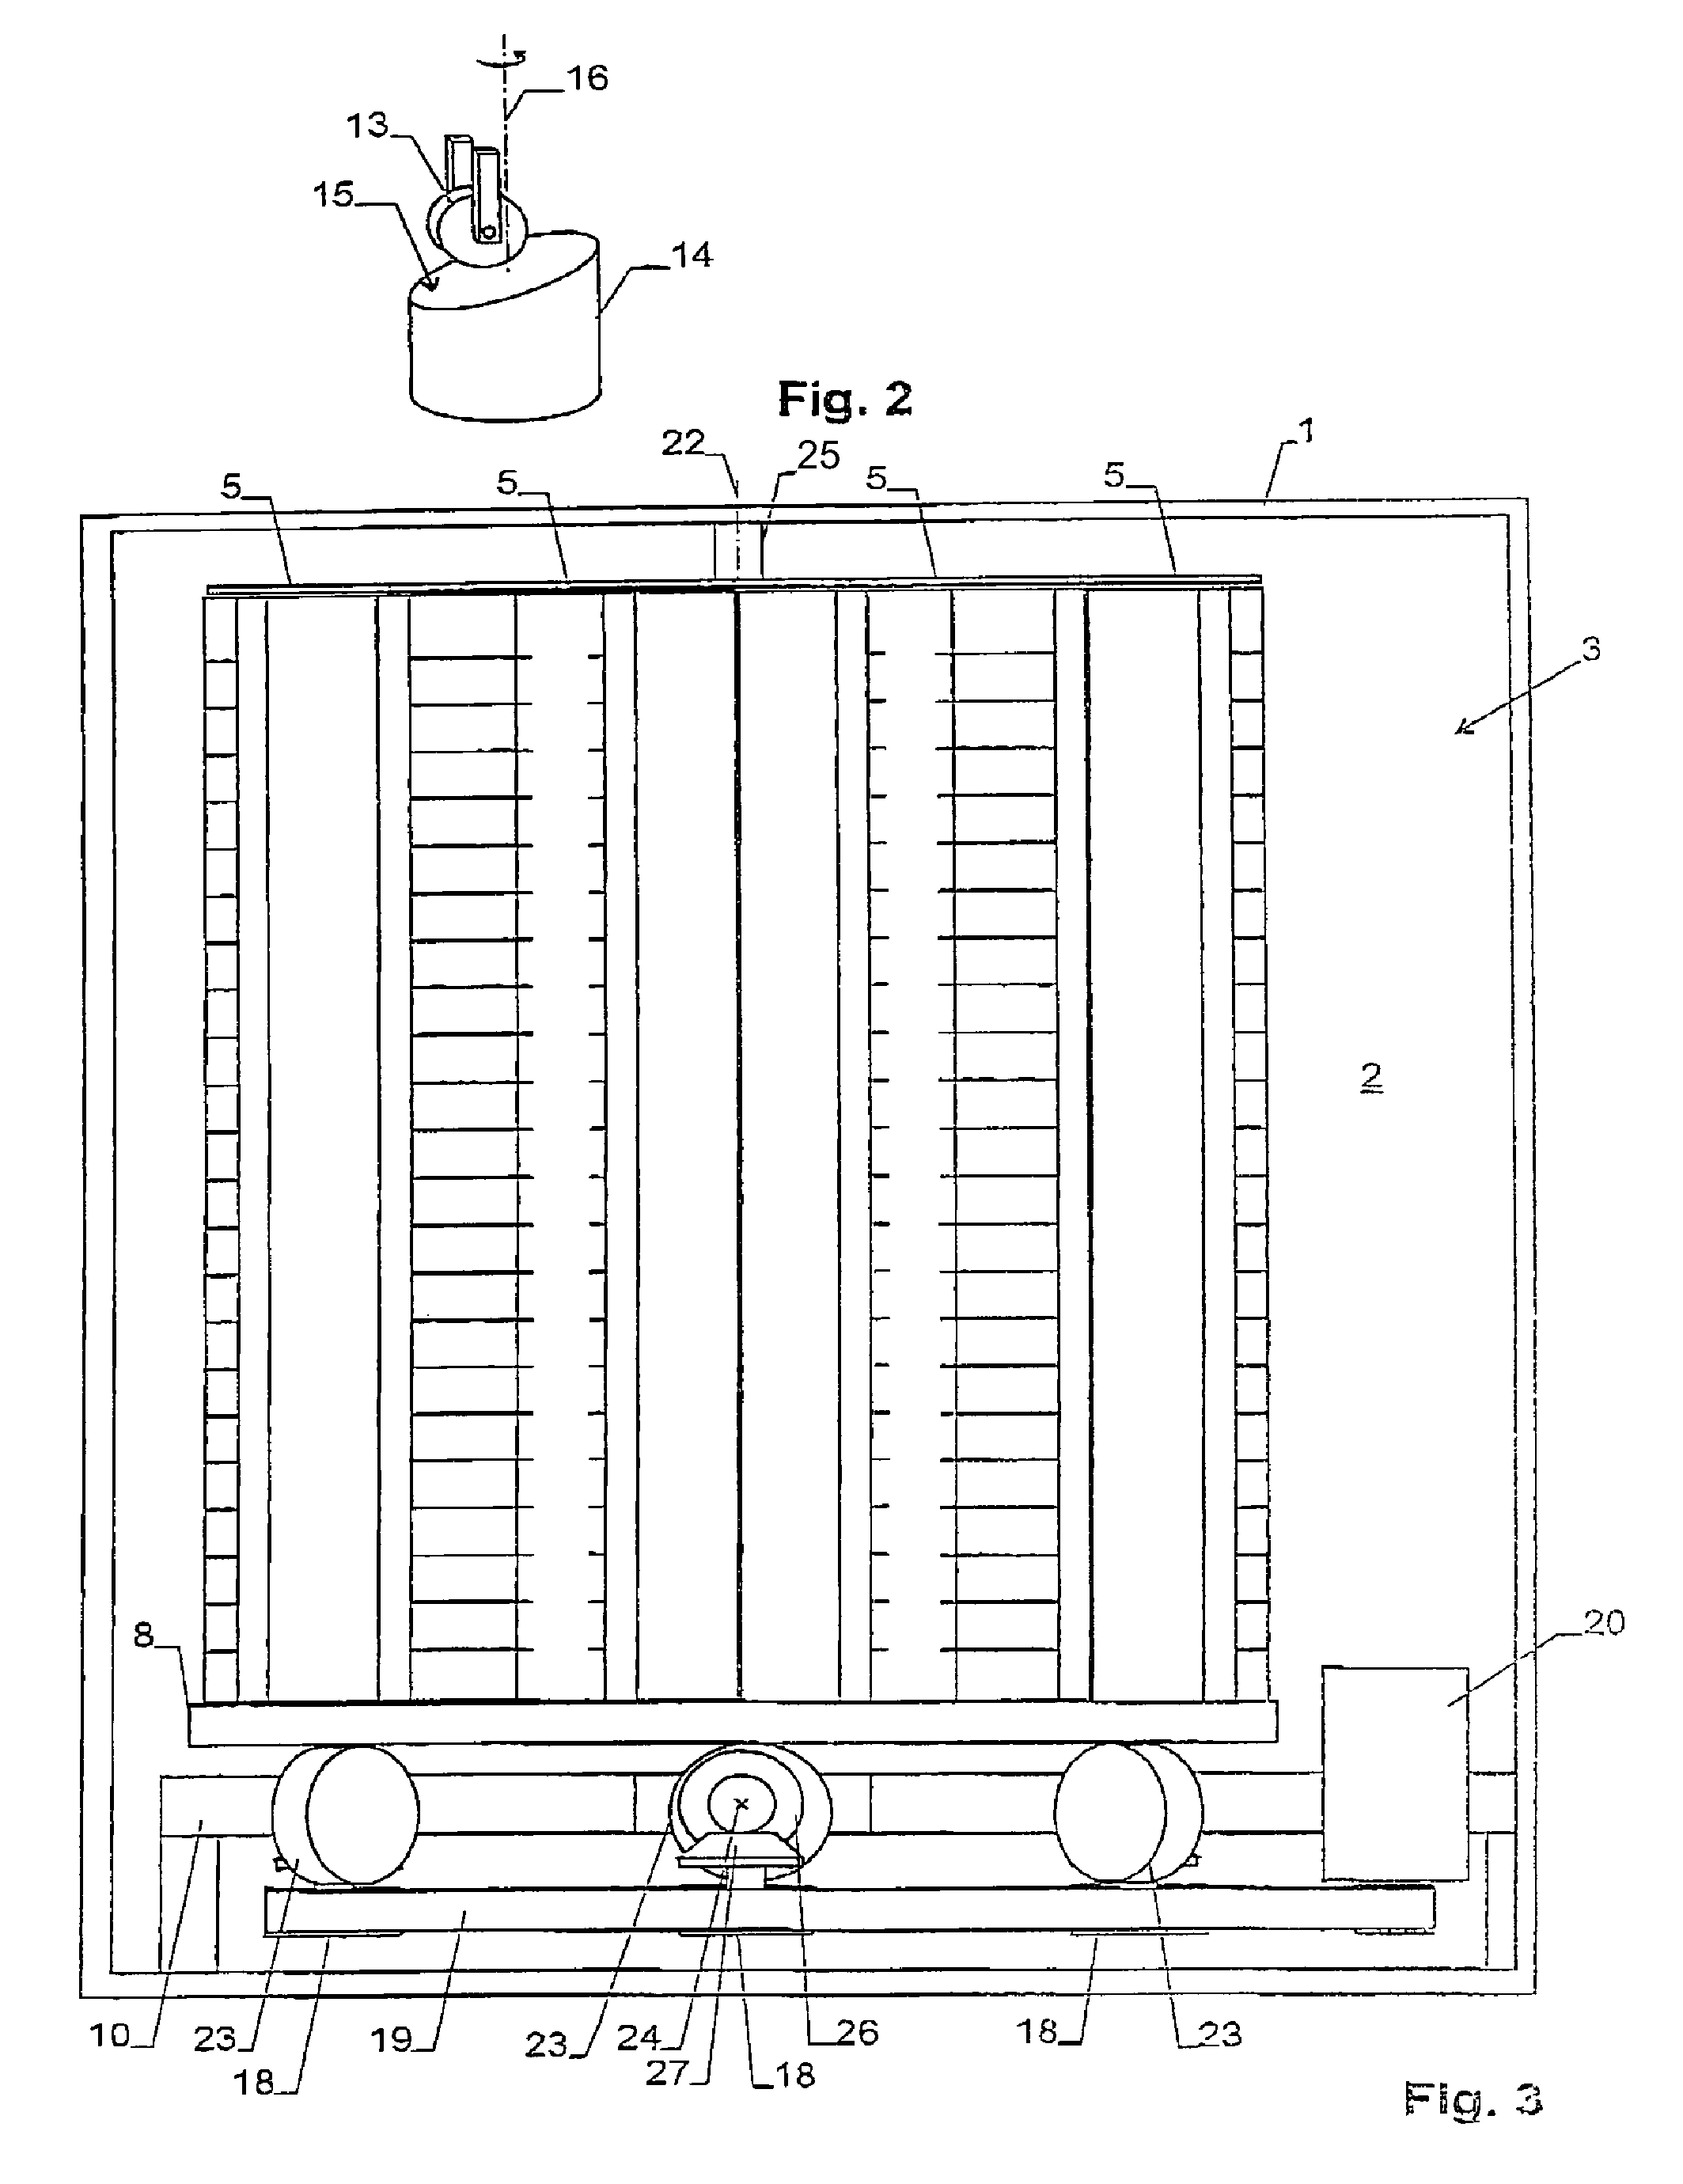 Storage device for laboratory samples having storage racks and a shaker